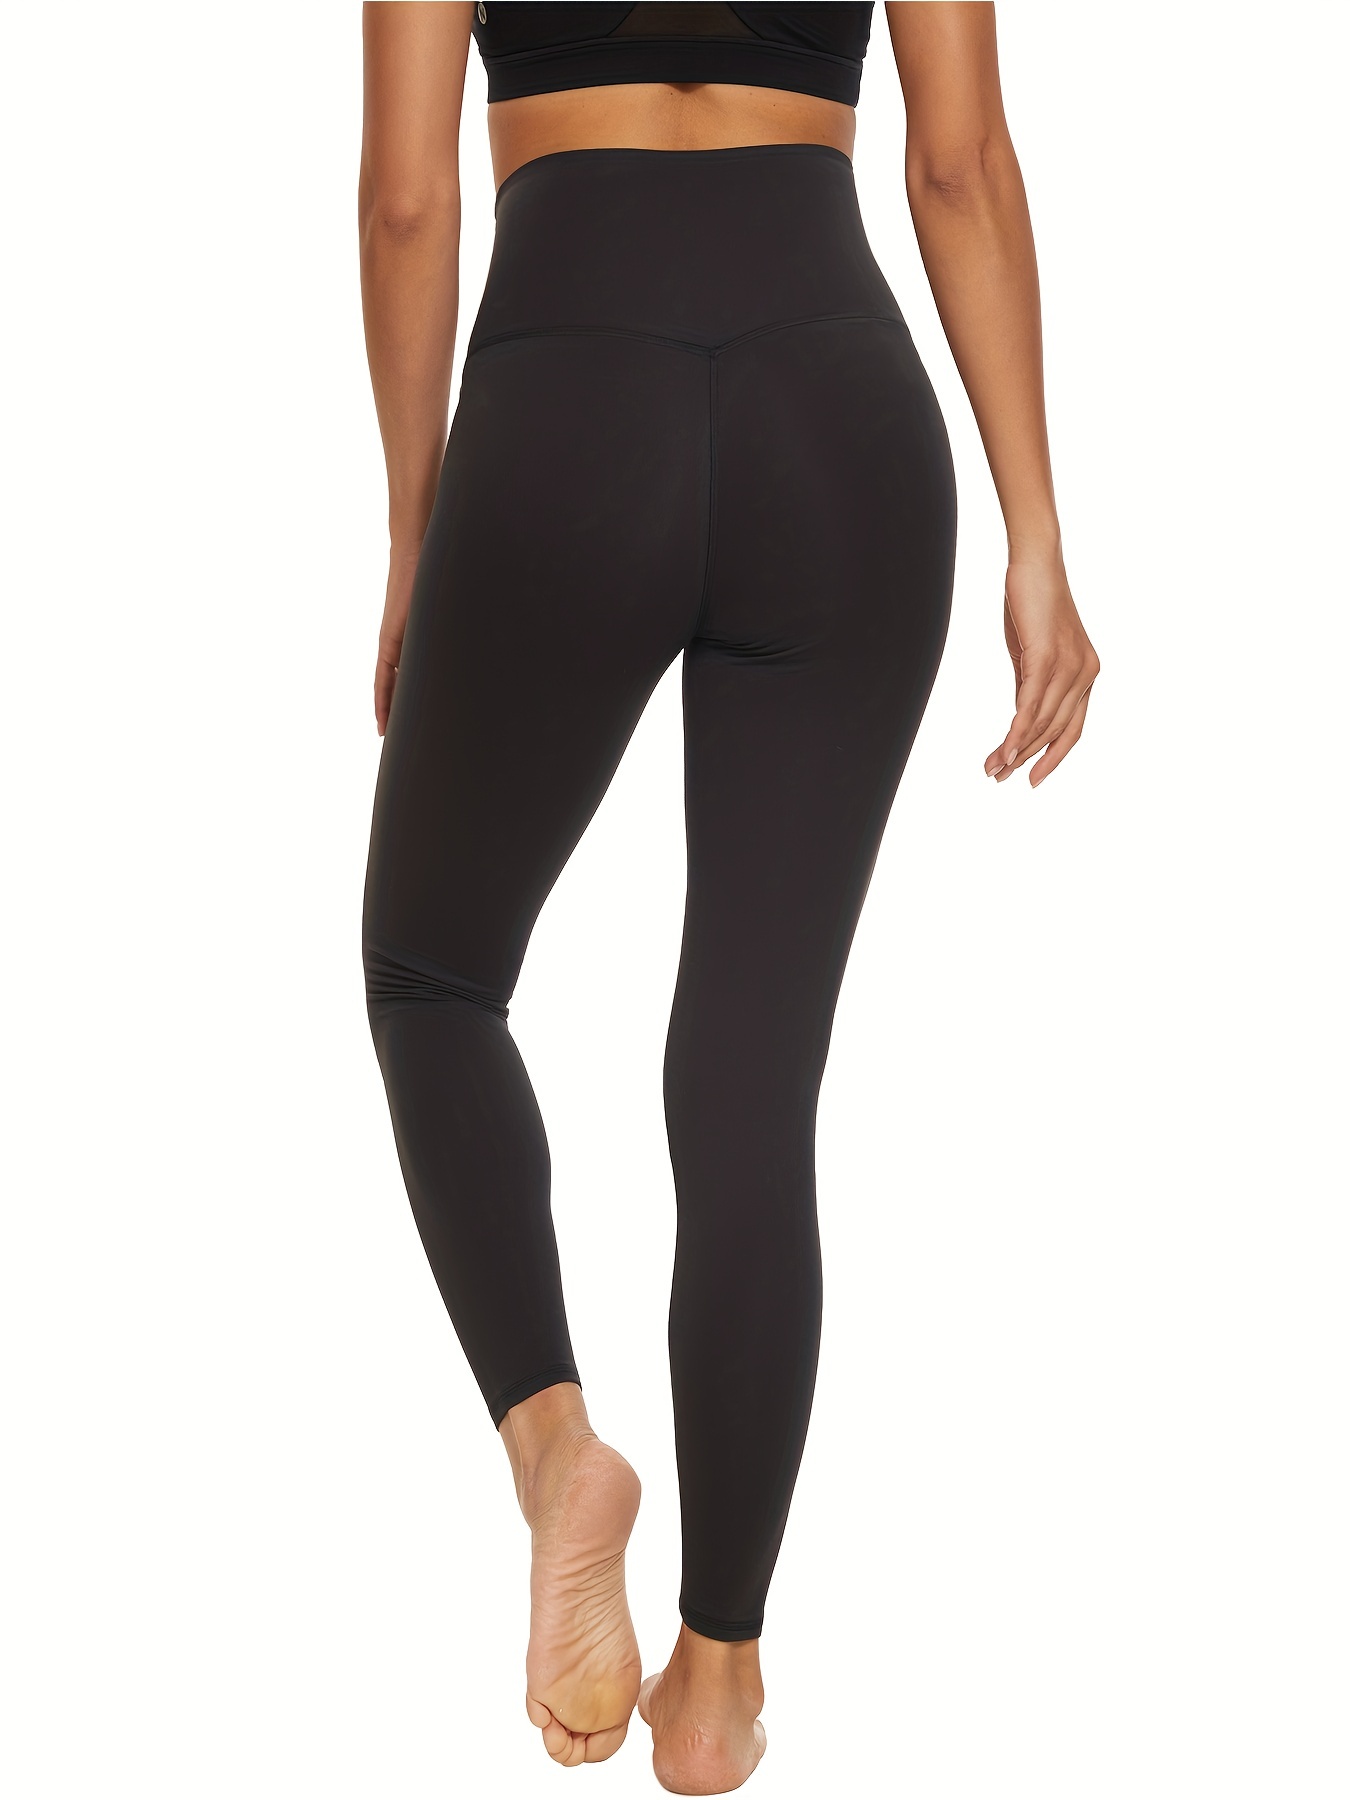 THE GYM PEOPLE Women's V Cross Waist Workout Leggings Tummy Control Running  Yoga Pants with Pockets Black Small